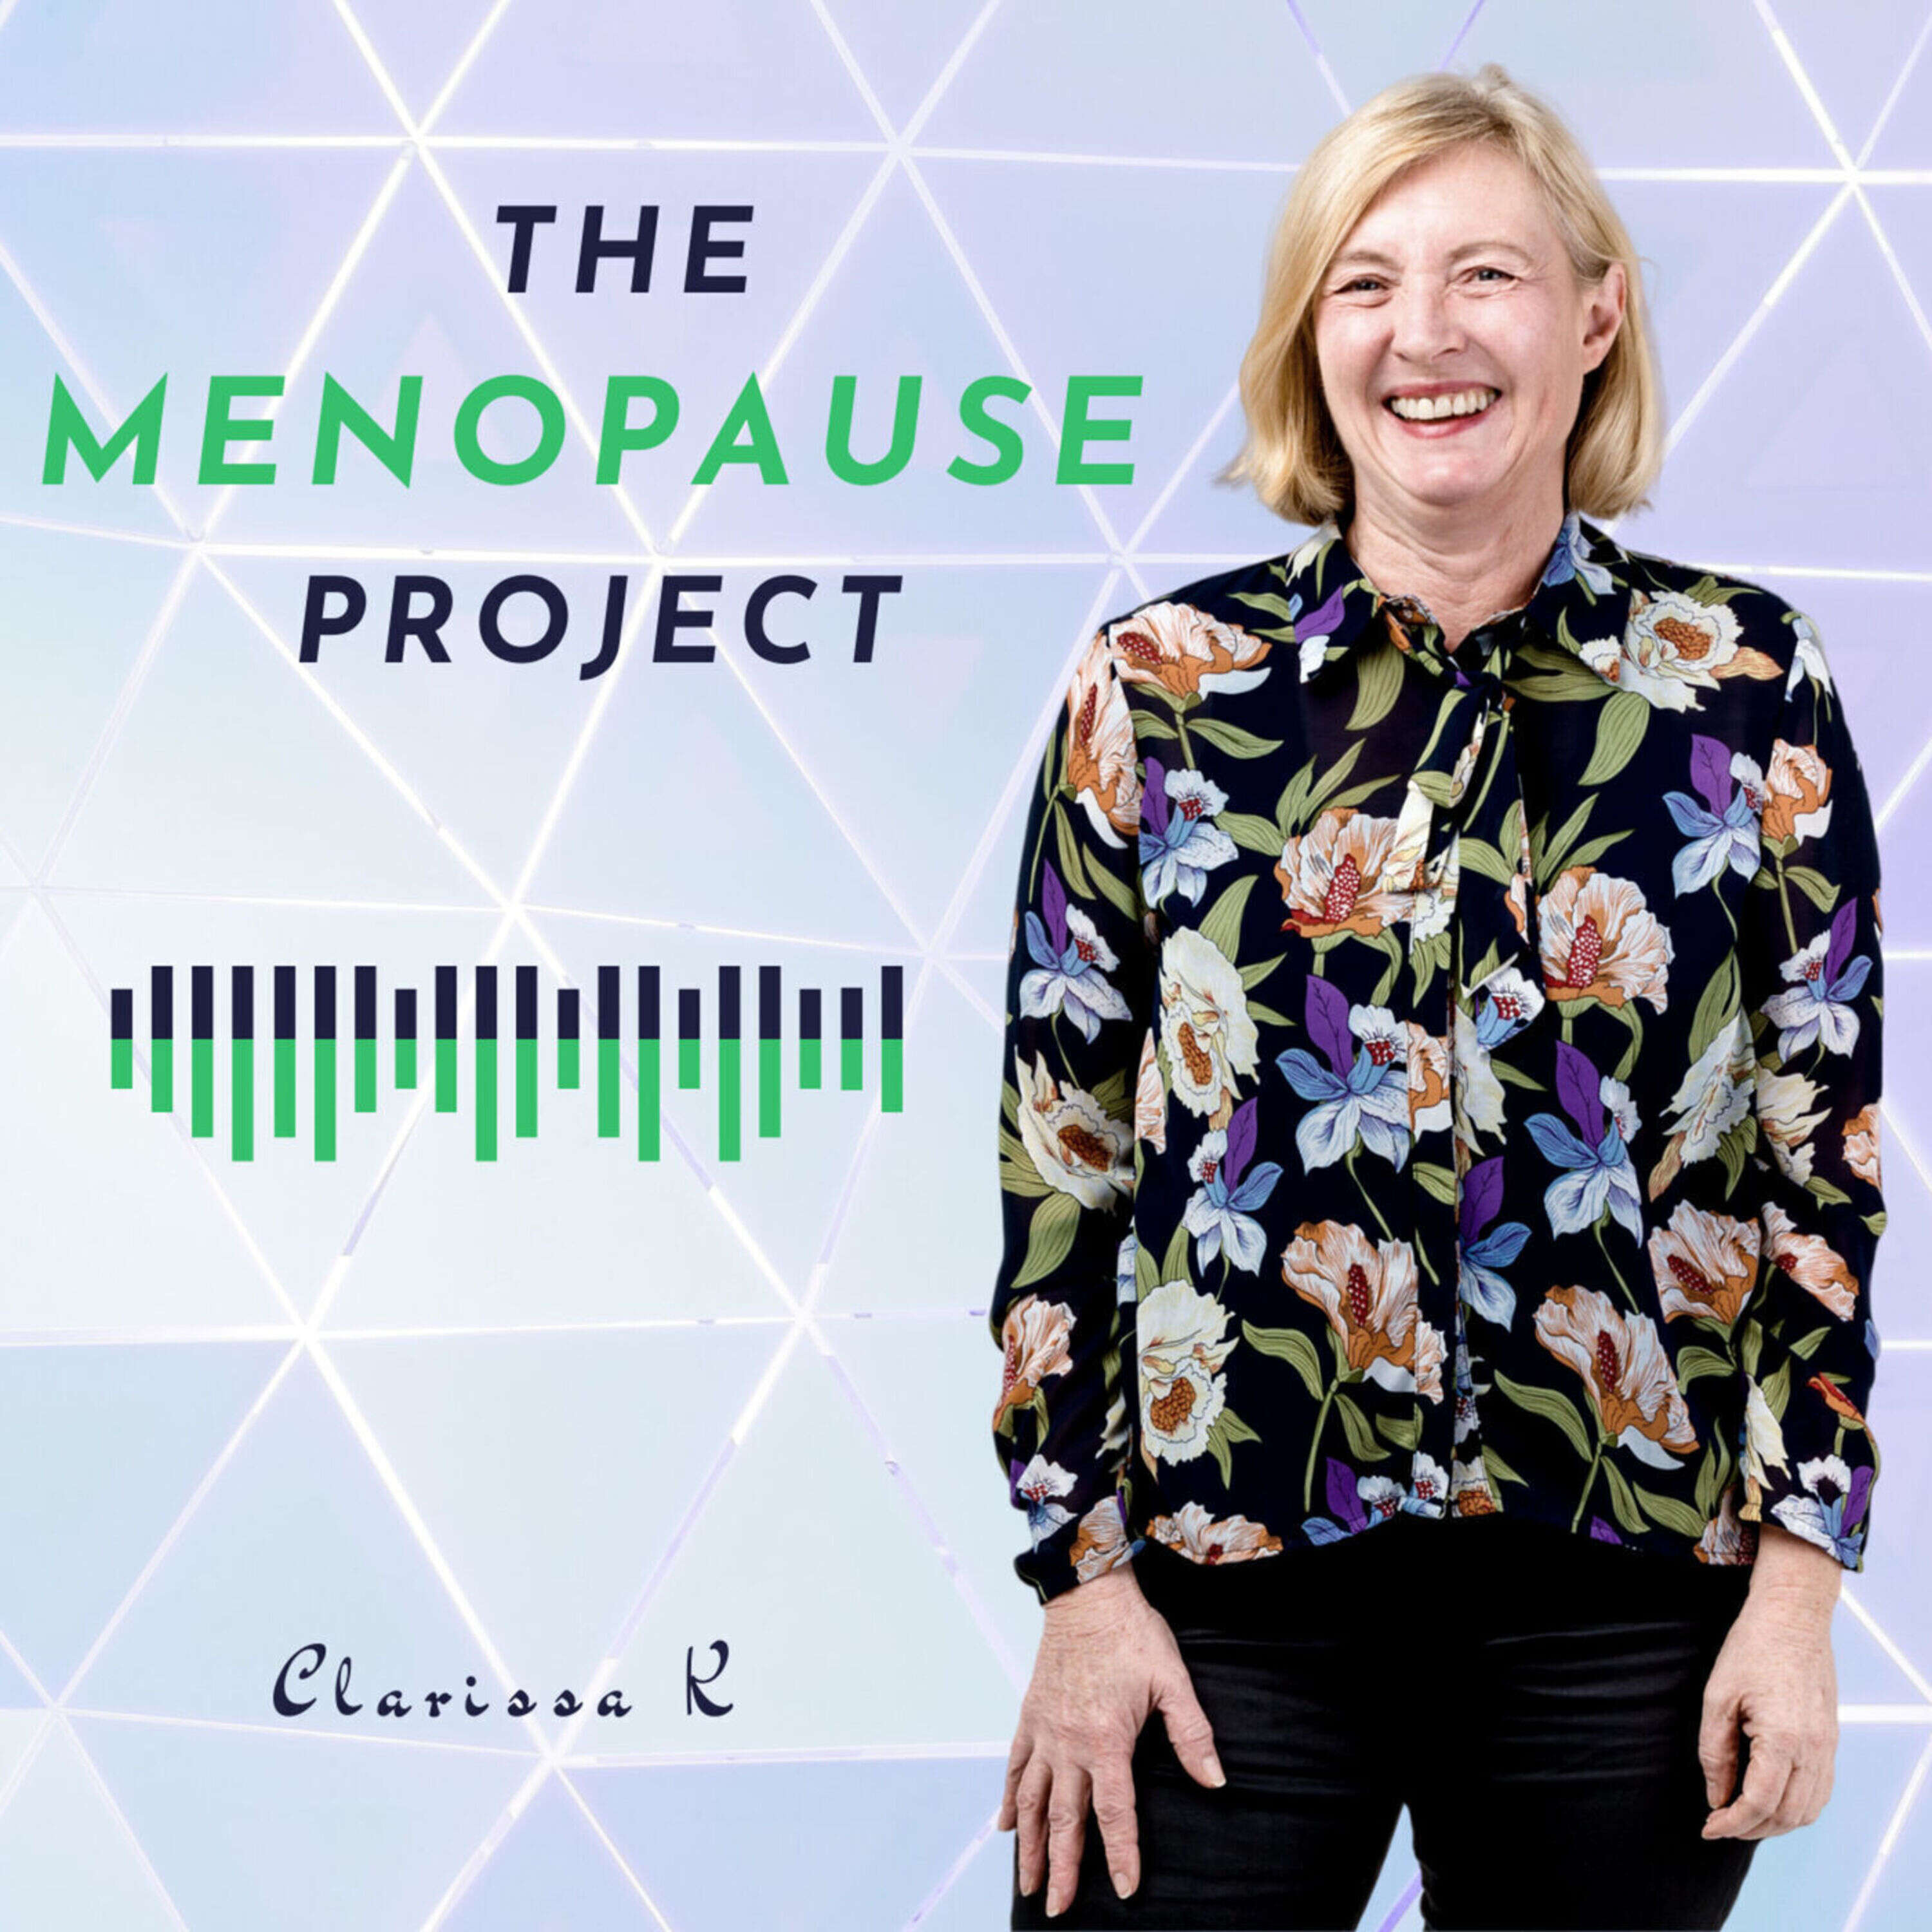 A Personal Experience with Early Menopause